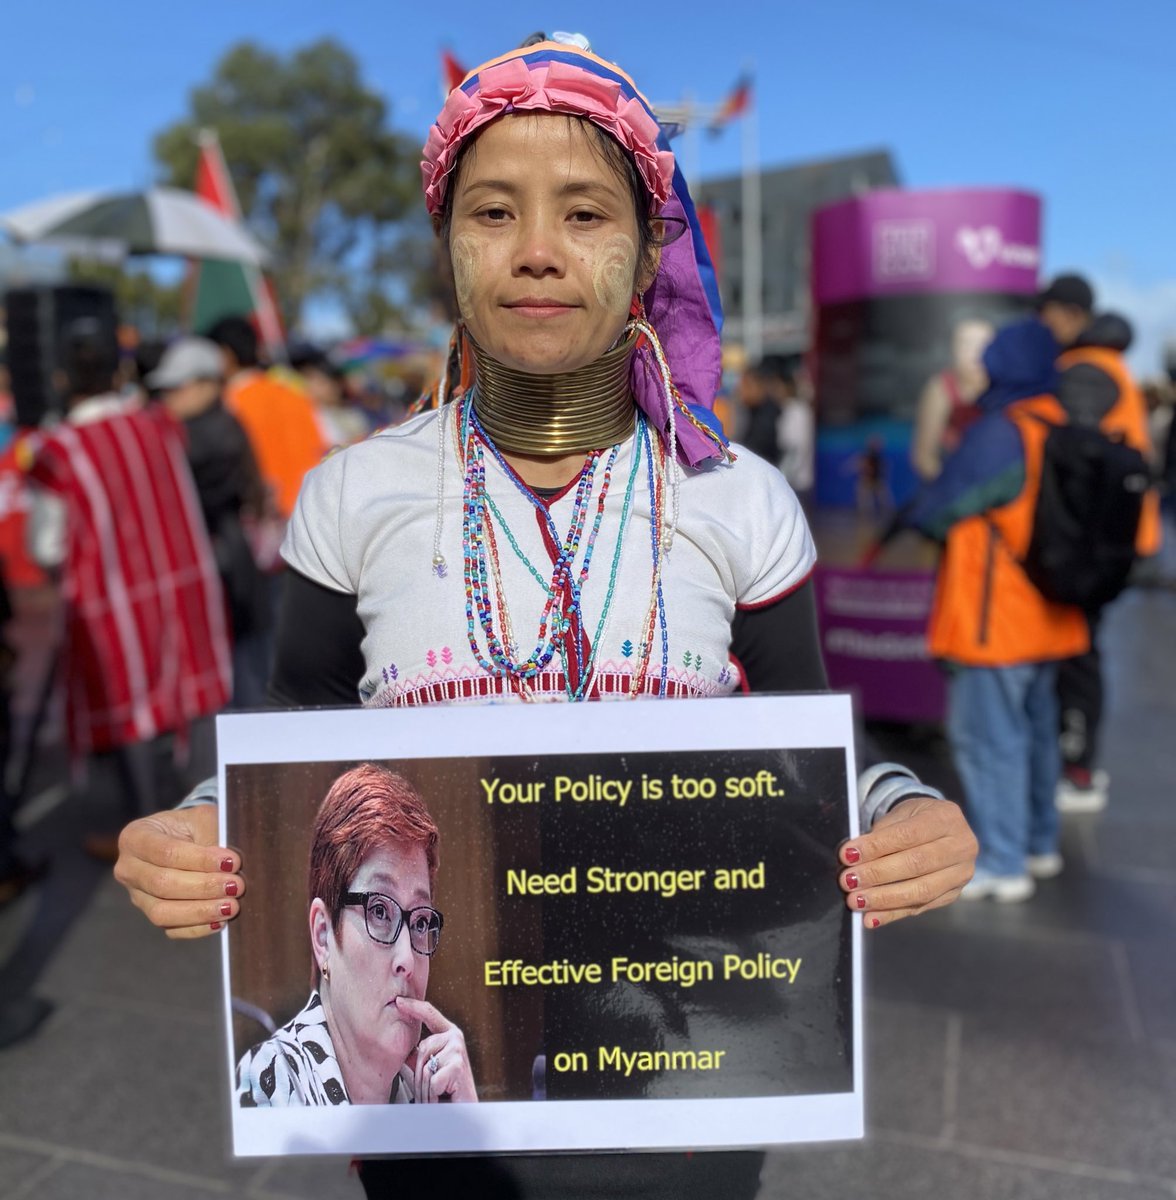 Blossom is Karenni, which she describes as a forgotten group. She remembers being terrified of the military since she was 8. She said she saw her grandfather killed in front of her. ‘The whole of my life I ran. We don’t have peace.’ She wants stronger action from Australia.